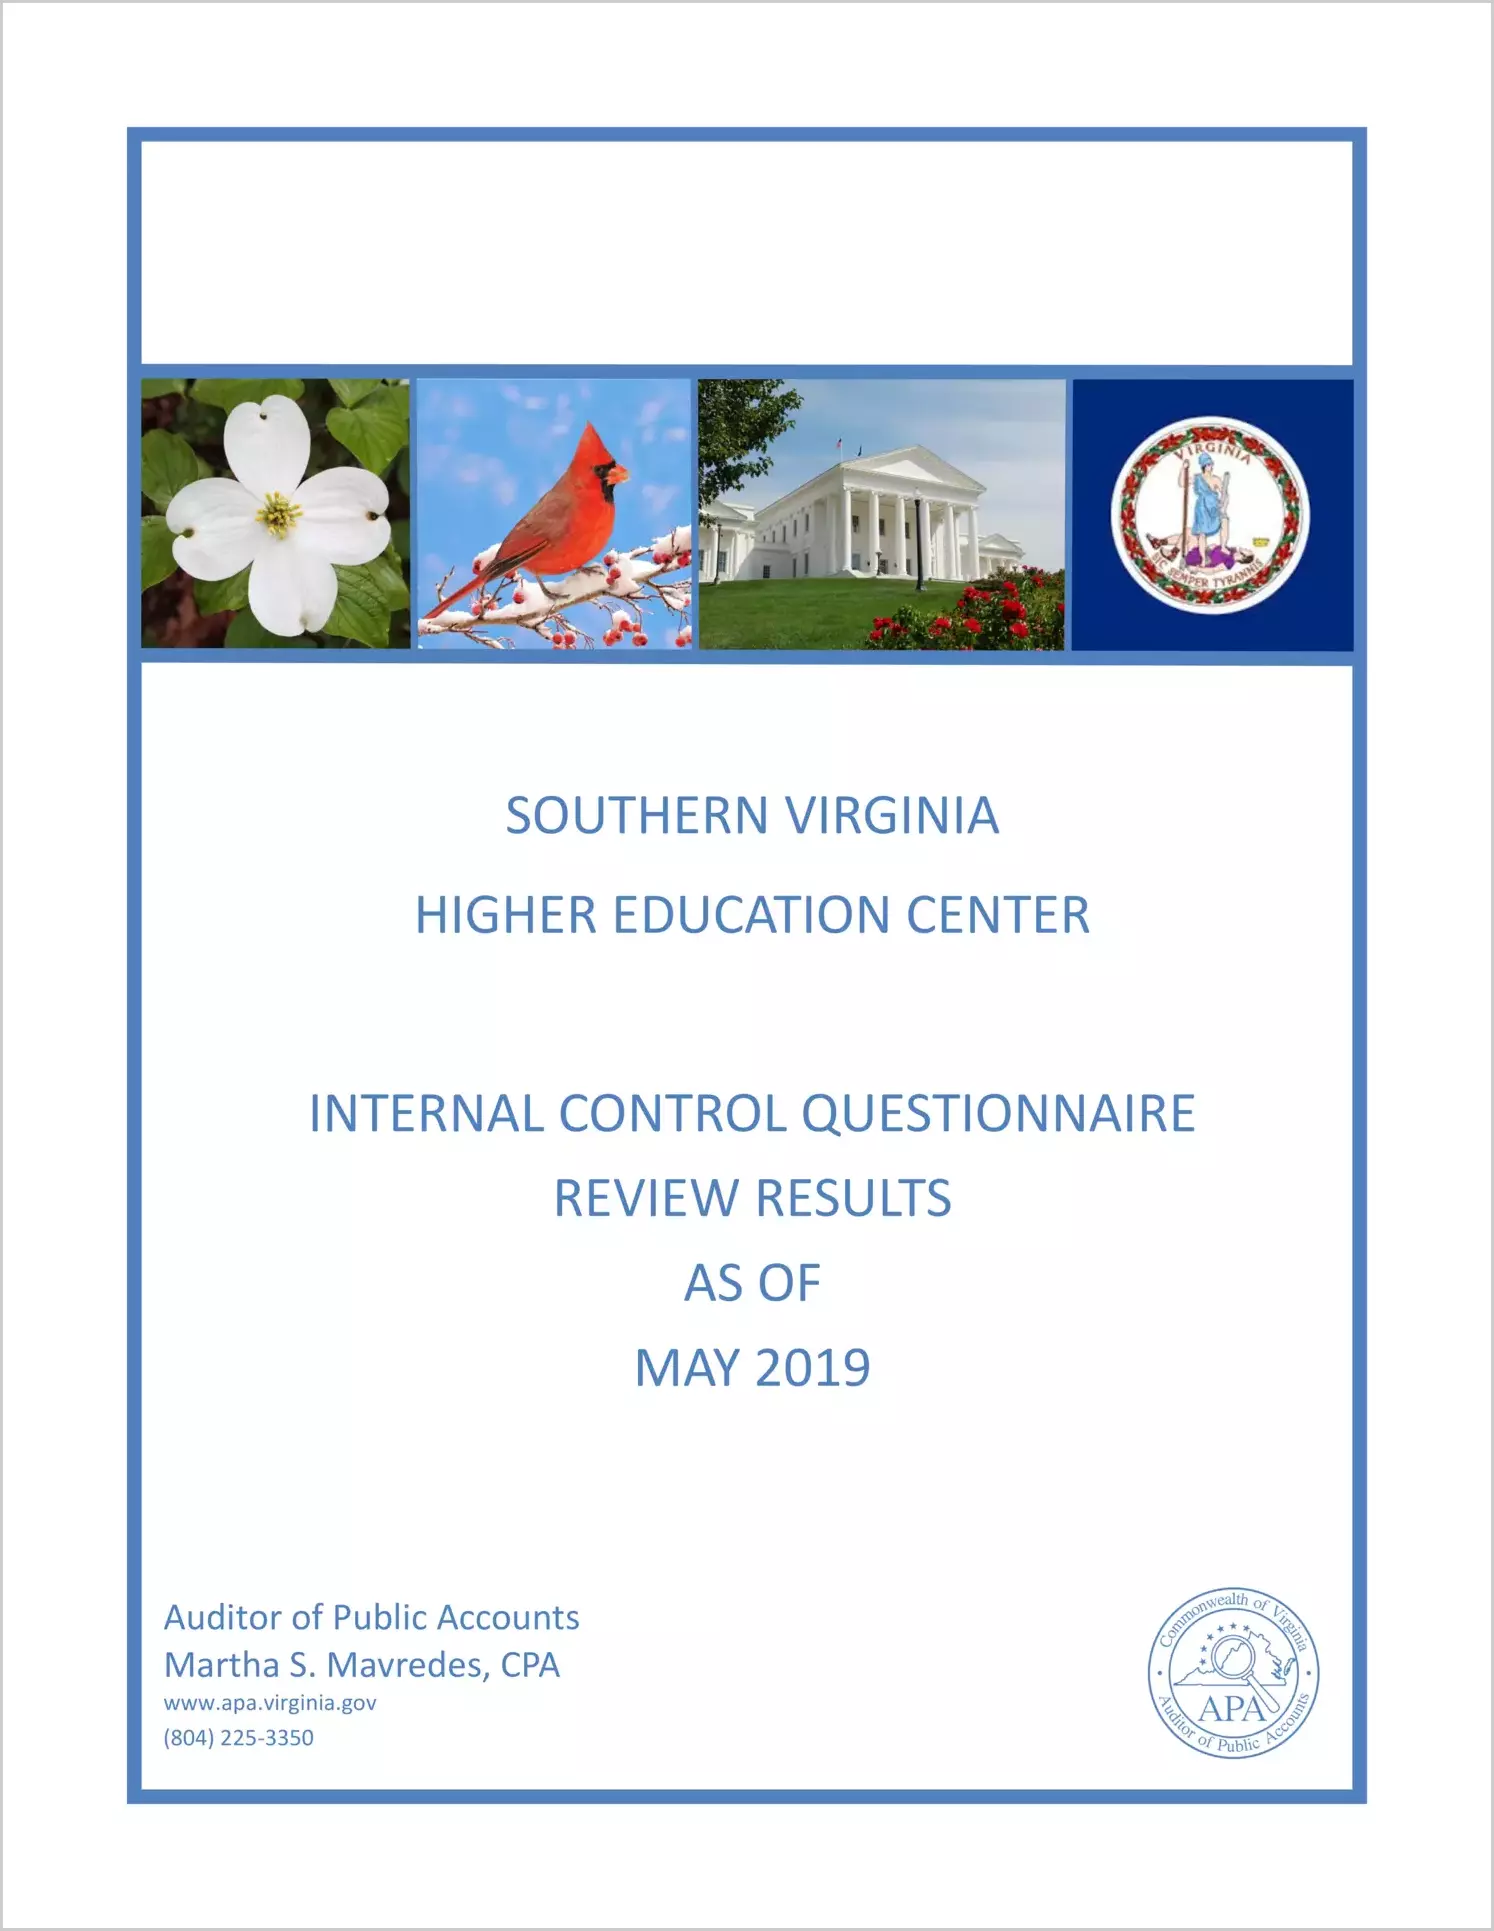 Southern Virginia Higher Education Center Internal Control Questionnaire Review Results as of May 2019